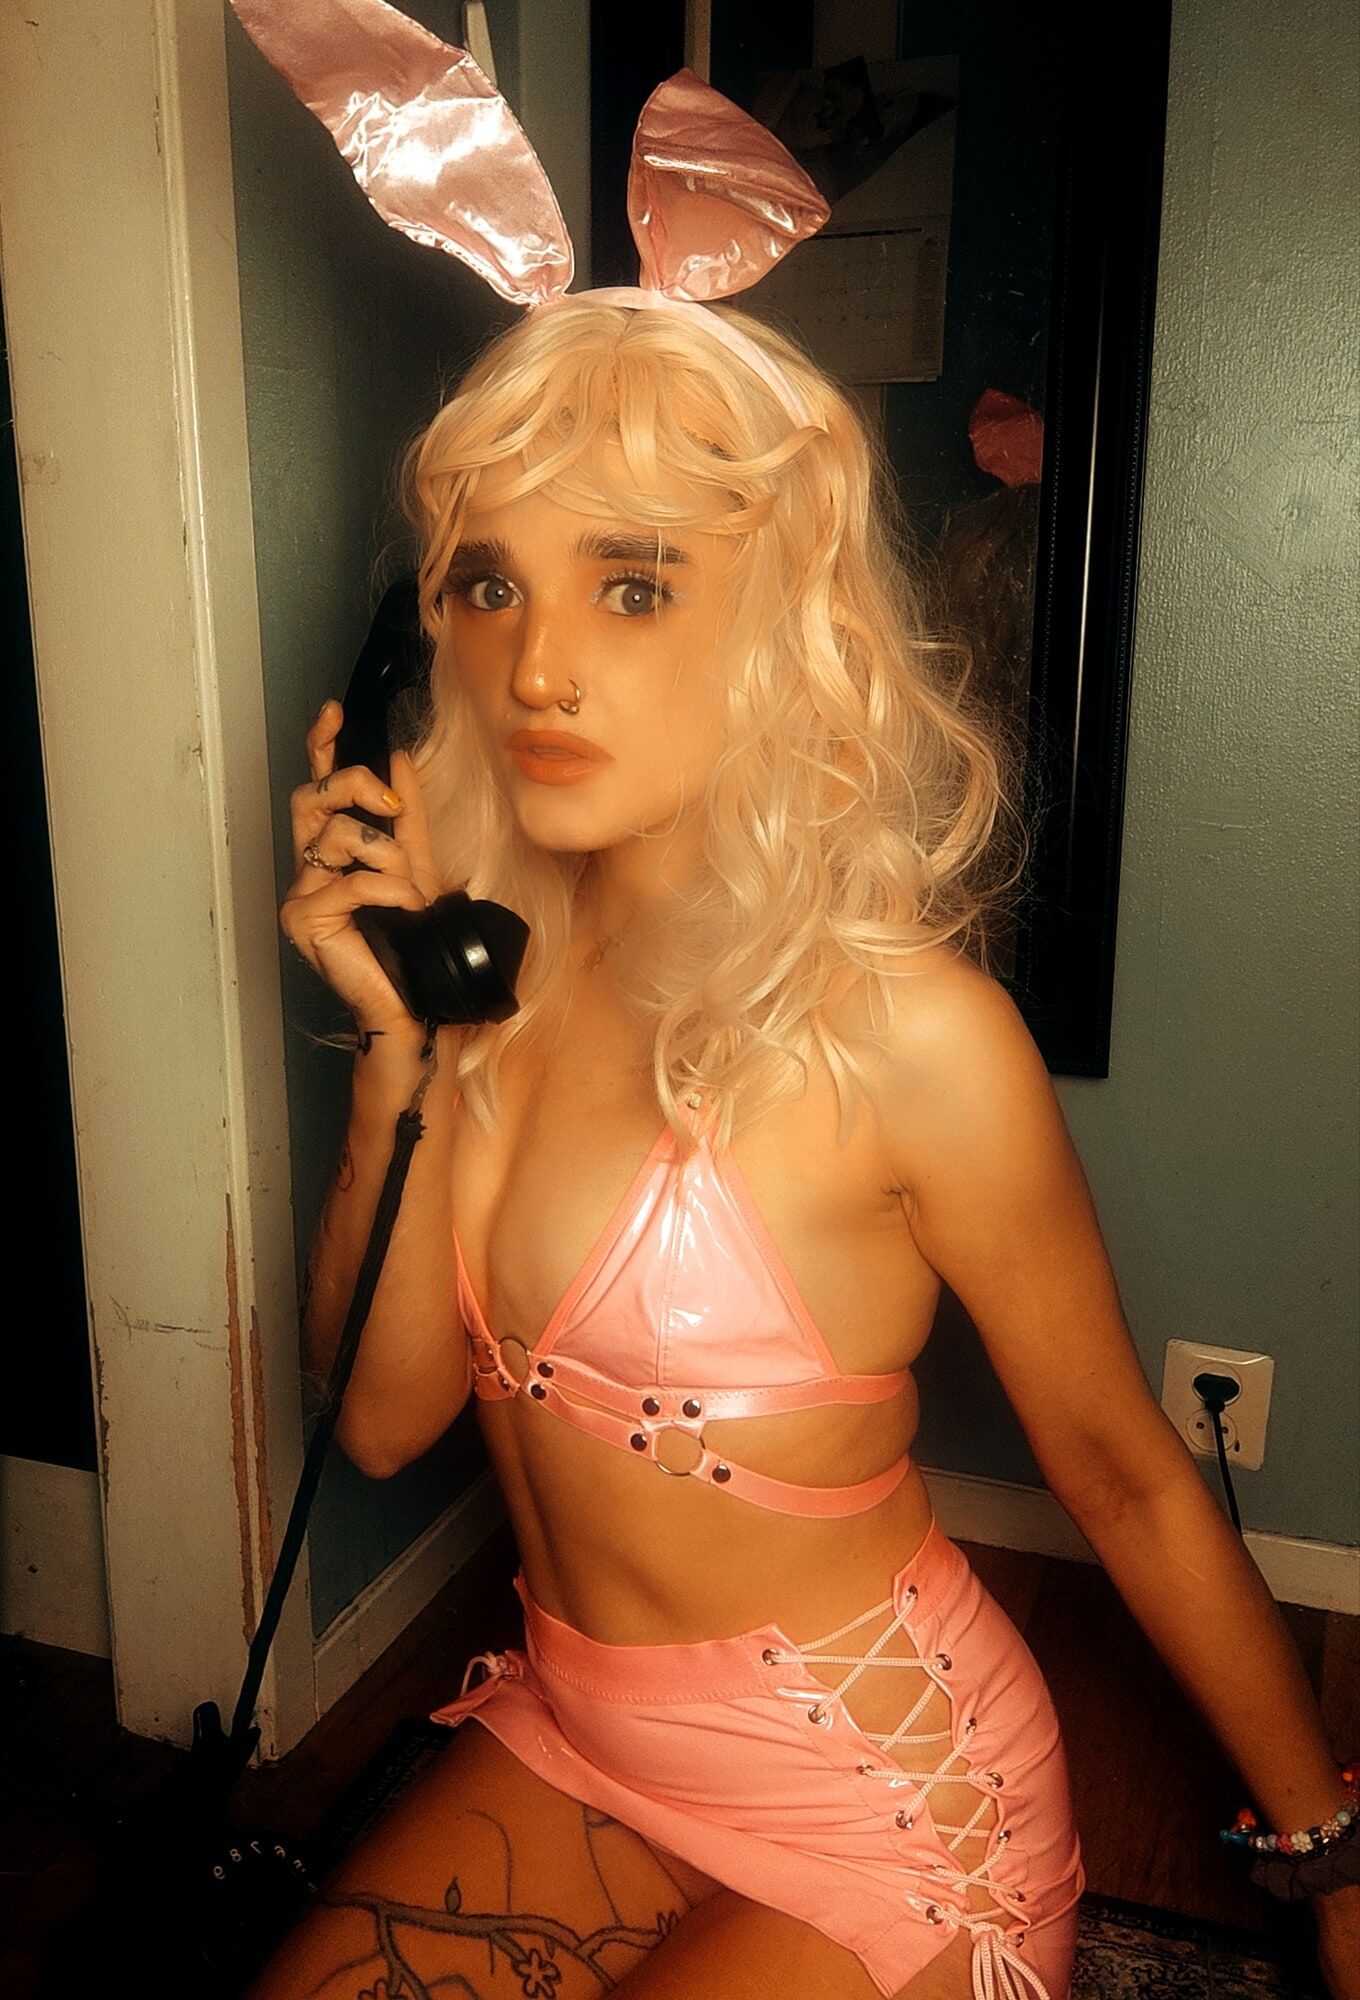 Pink bunny talking on the phone while showing off pussy #50